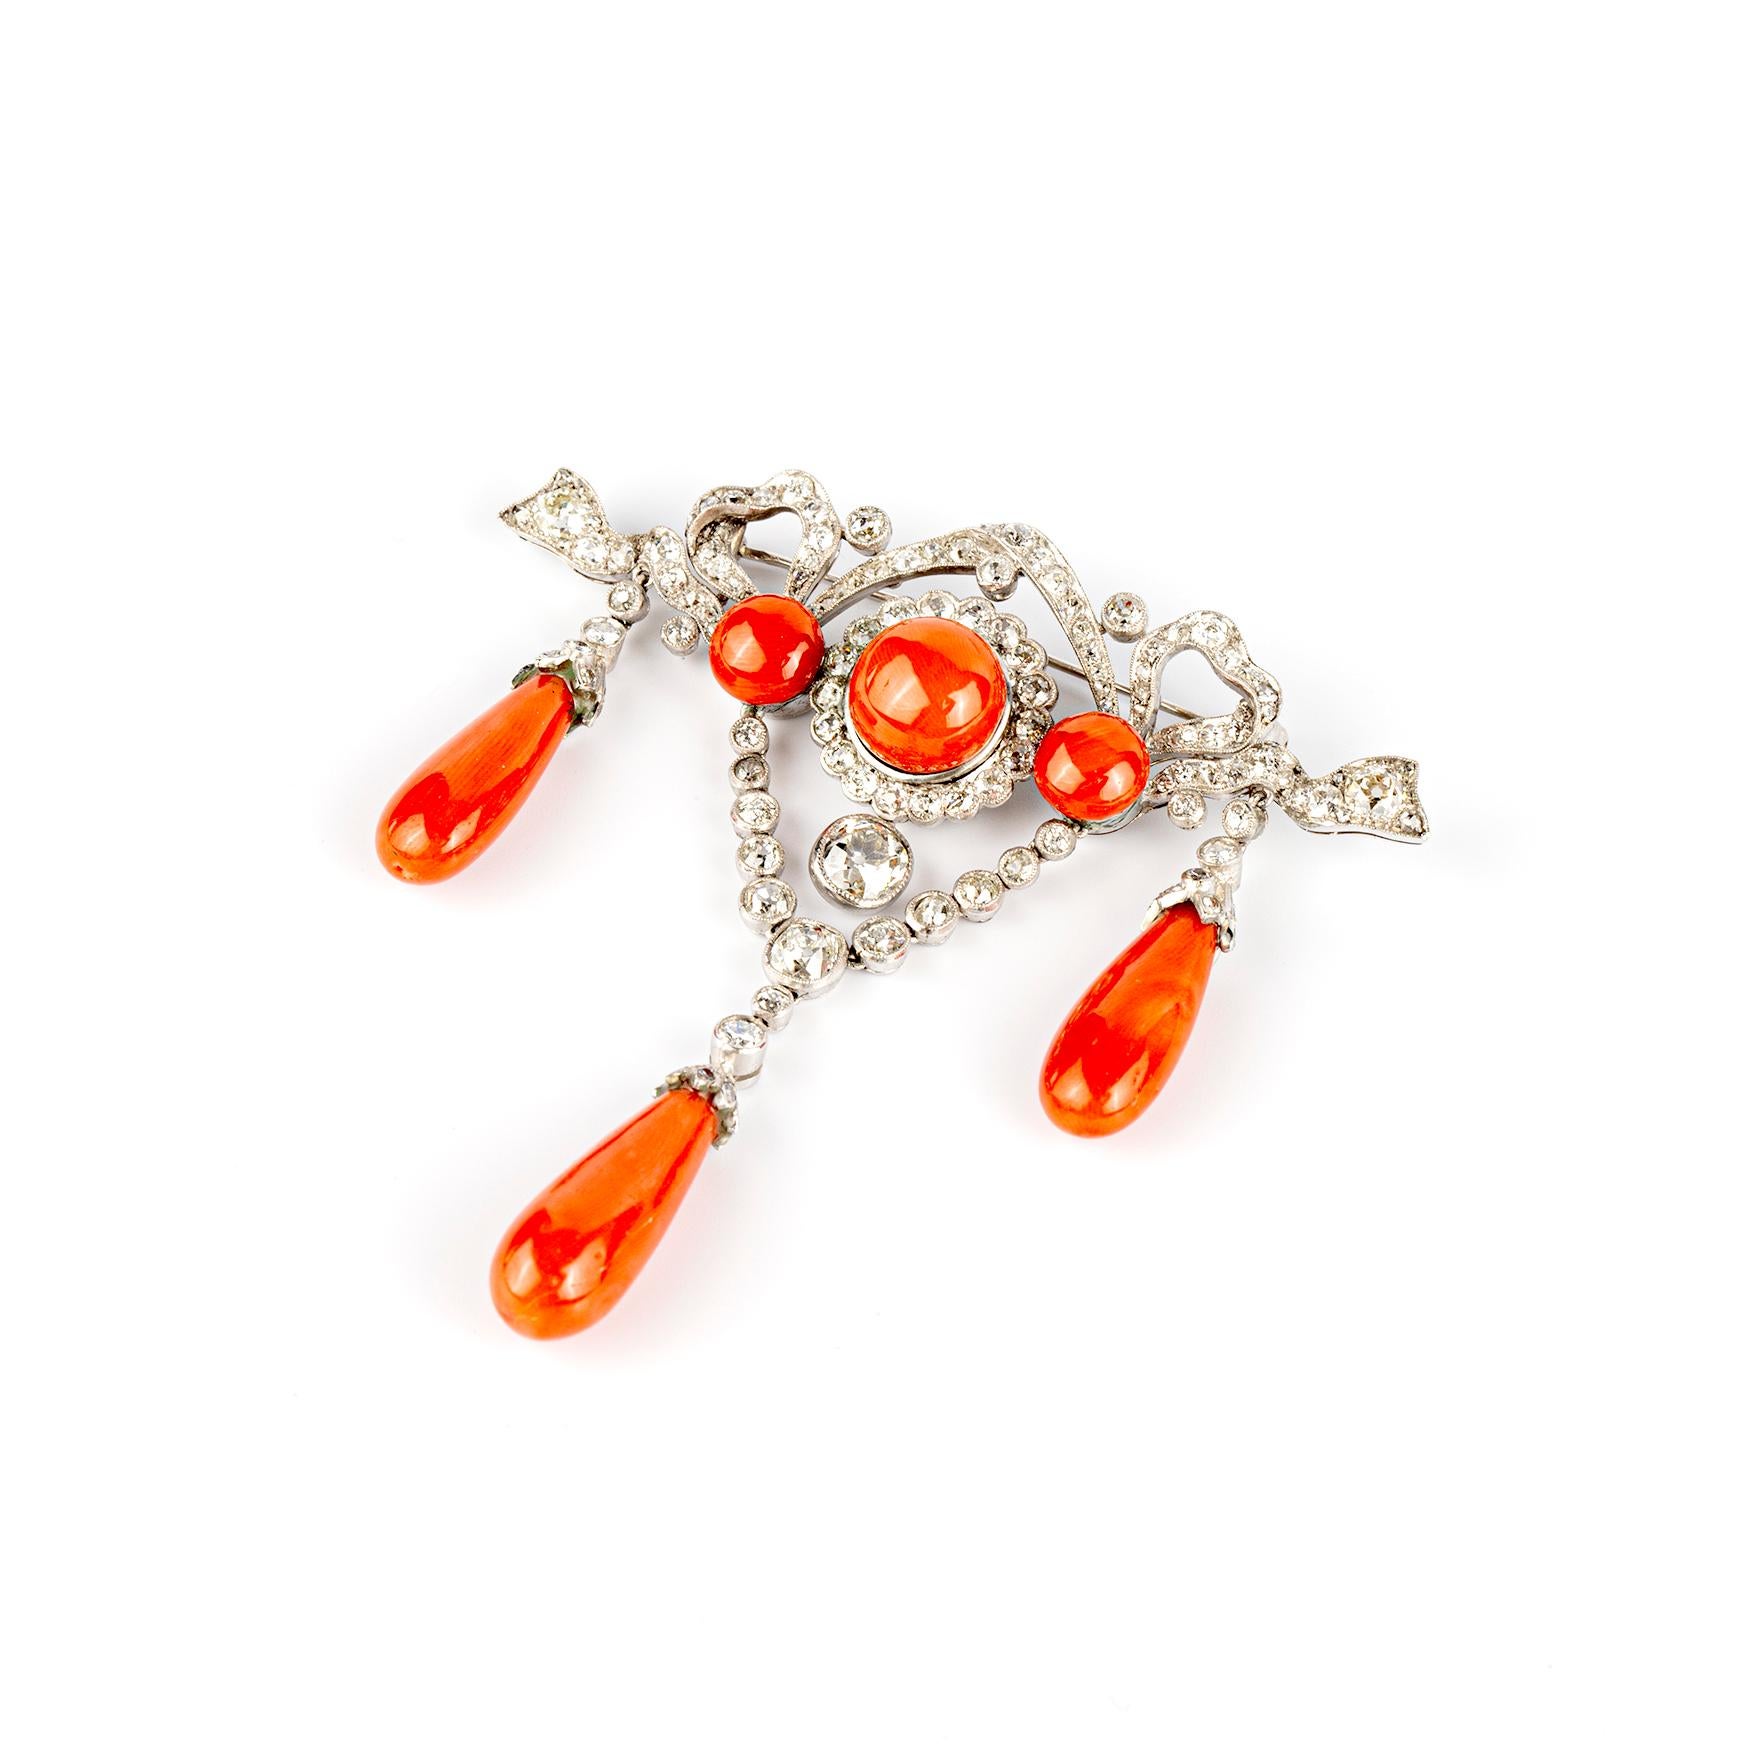 A late 19th Century Antique Brooch in the Bow Ribbon Style with Old Cut Diamonds and Fine Red Coral.